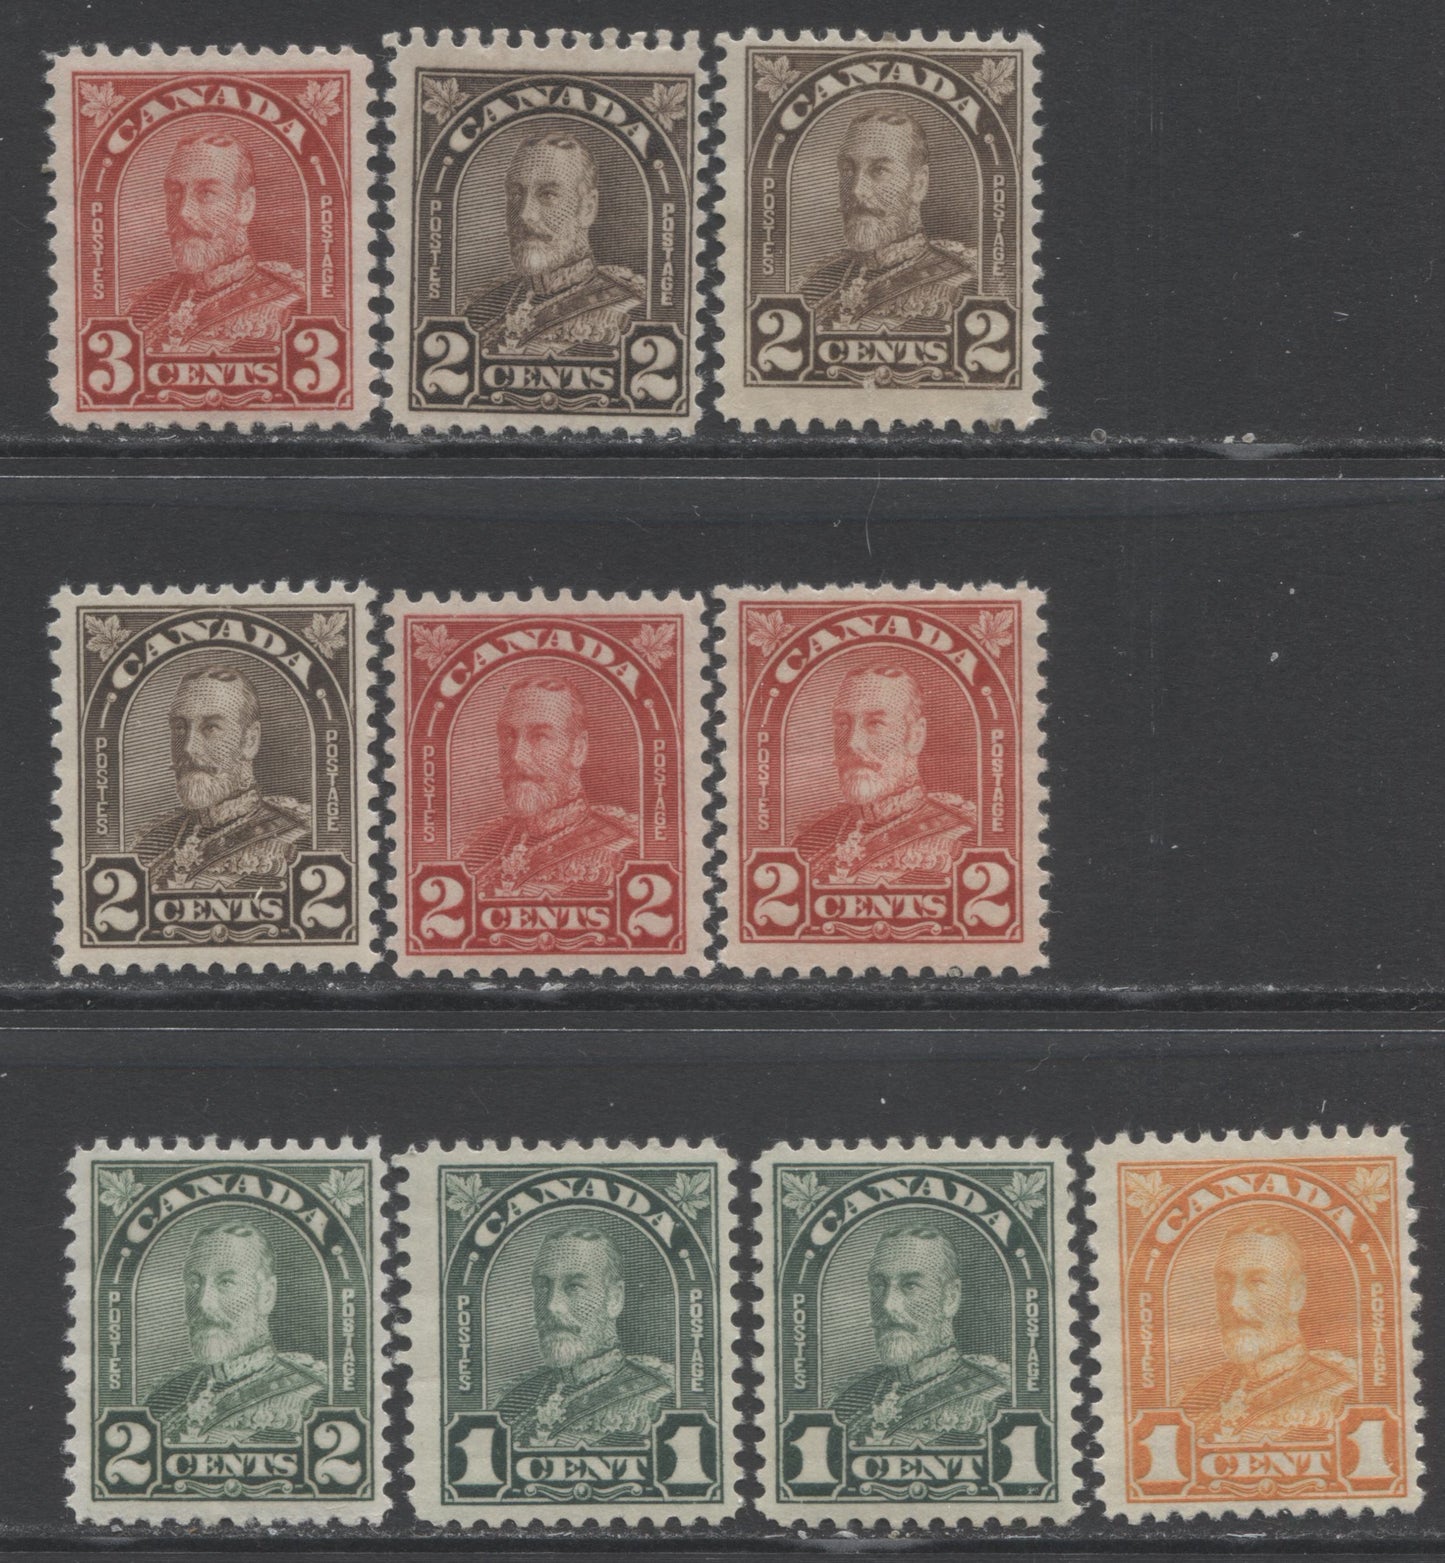 Lot 165 Canada #162/167 1c-3c Orange - Deep Red King George V, 1930-1931 Arch/Leaf Issue, 10 F/VFNH & OG Singles, Includes Both Die Types & Extra Shades, Including the Pale Yellow Brown 2c